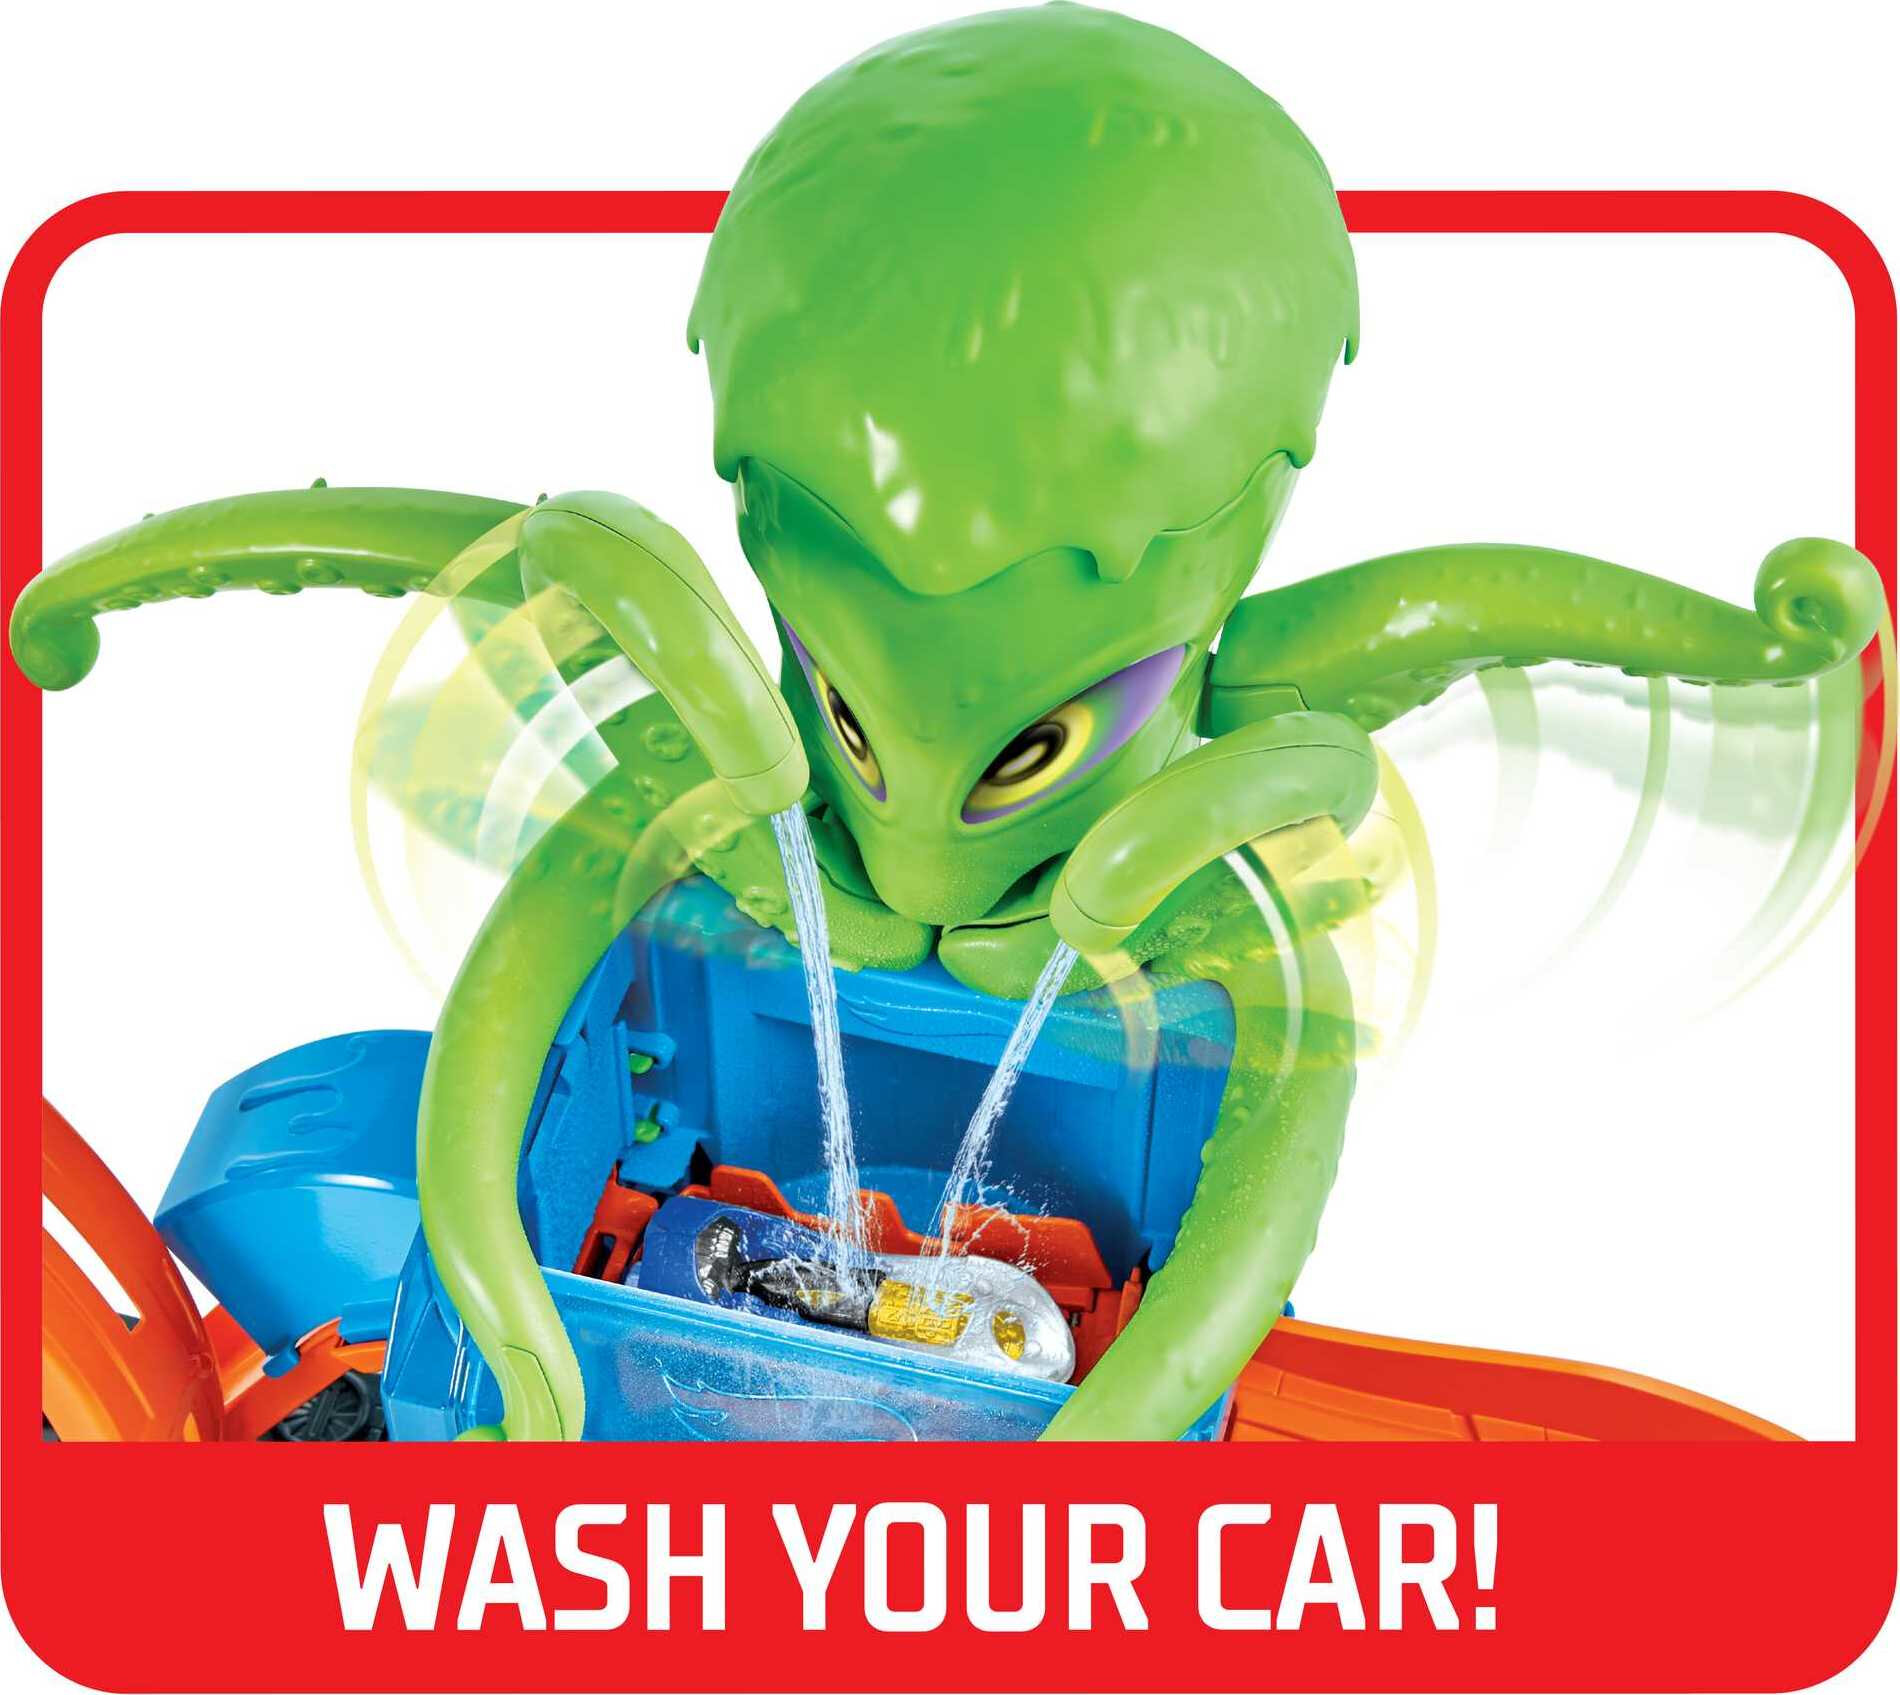 Hot Wheels City Ultimate Octo Car Wash Playset & 1 Color Reveal Toy Car in 1:64 Scale - image 4 of 7